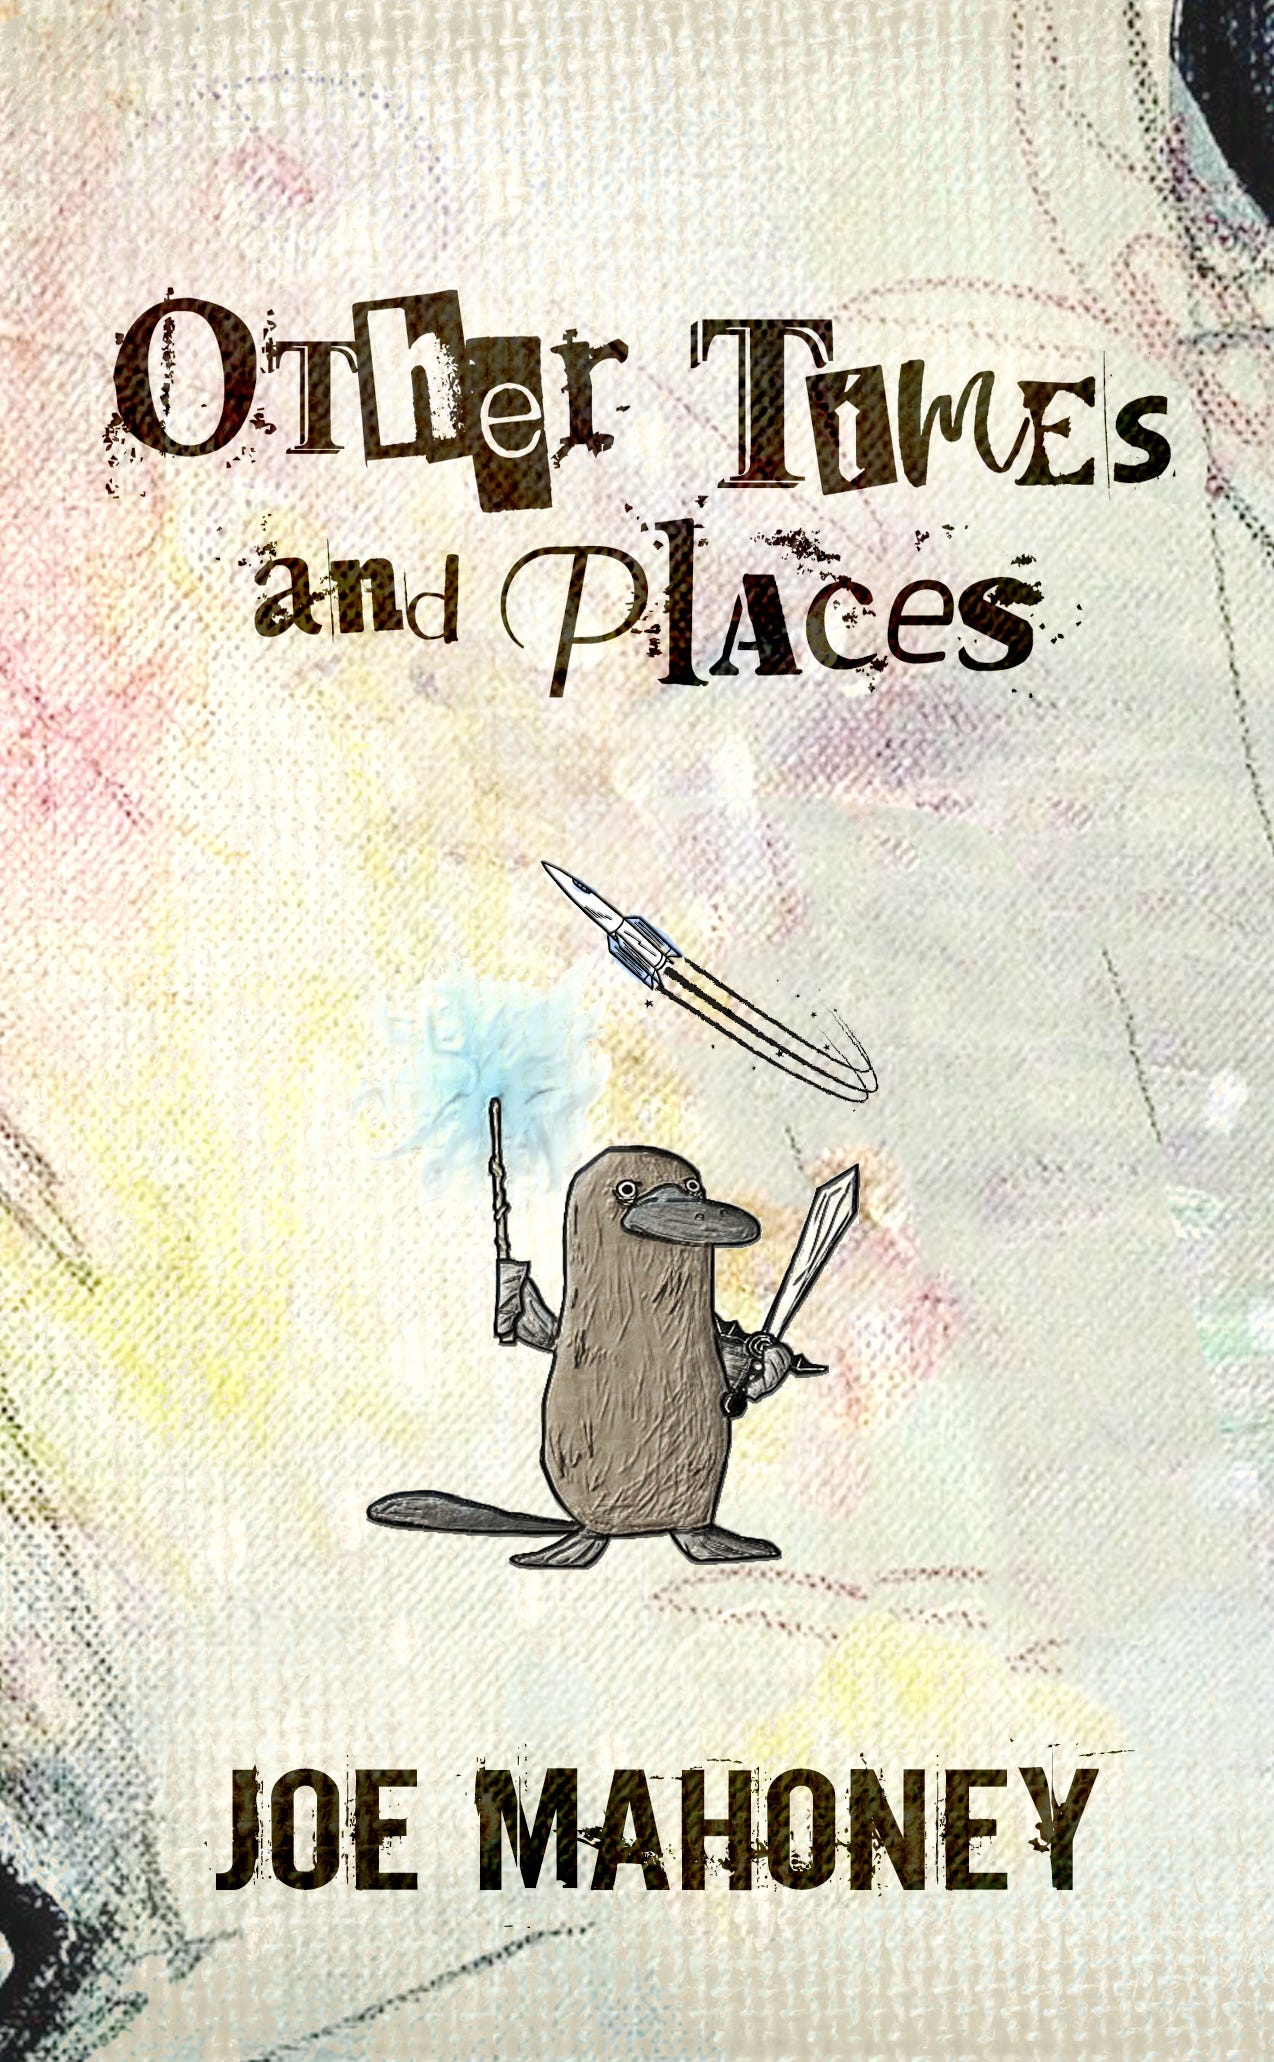 Cover of short story collection with platypus on front wielding a sword and wand with a spaceship flying overhead